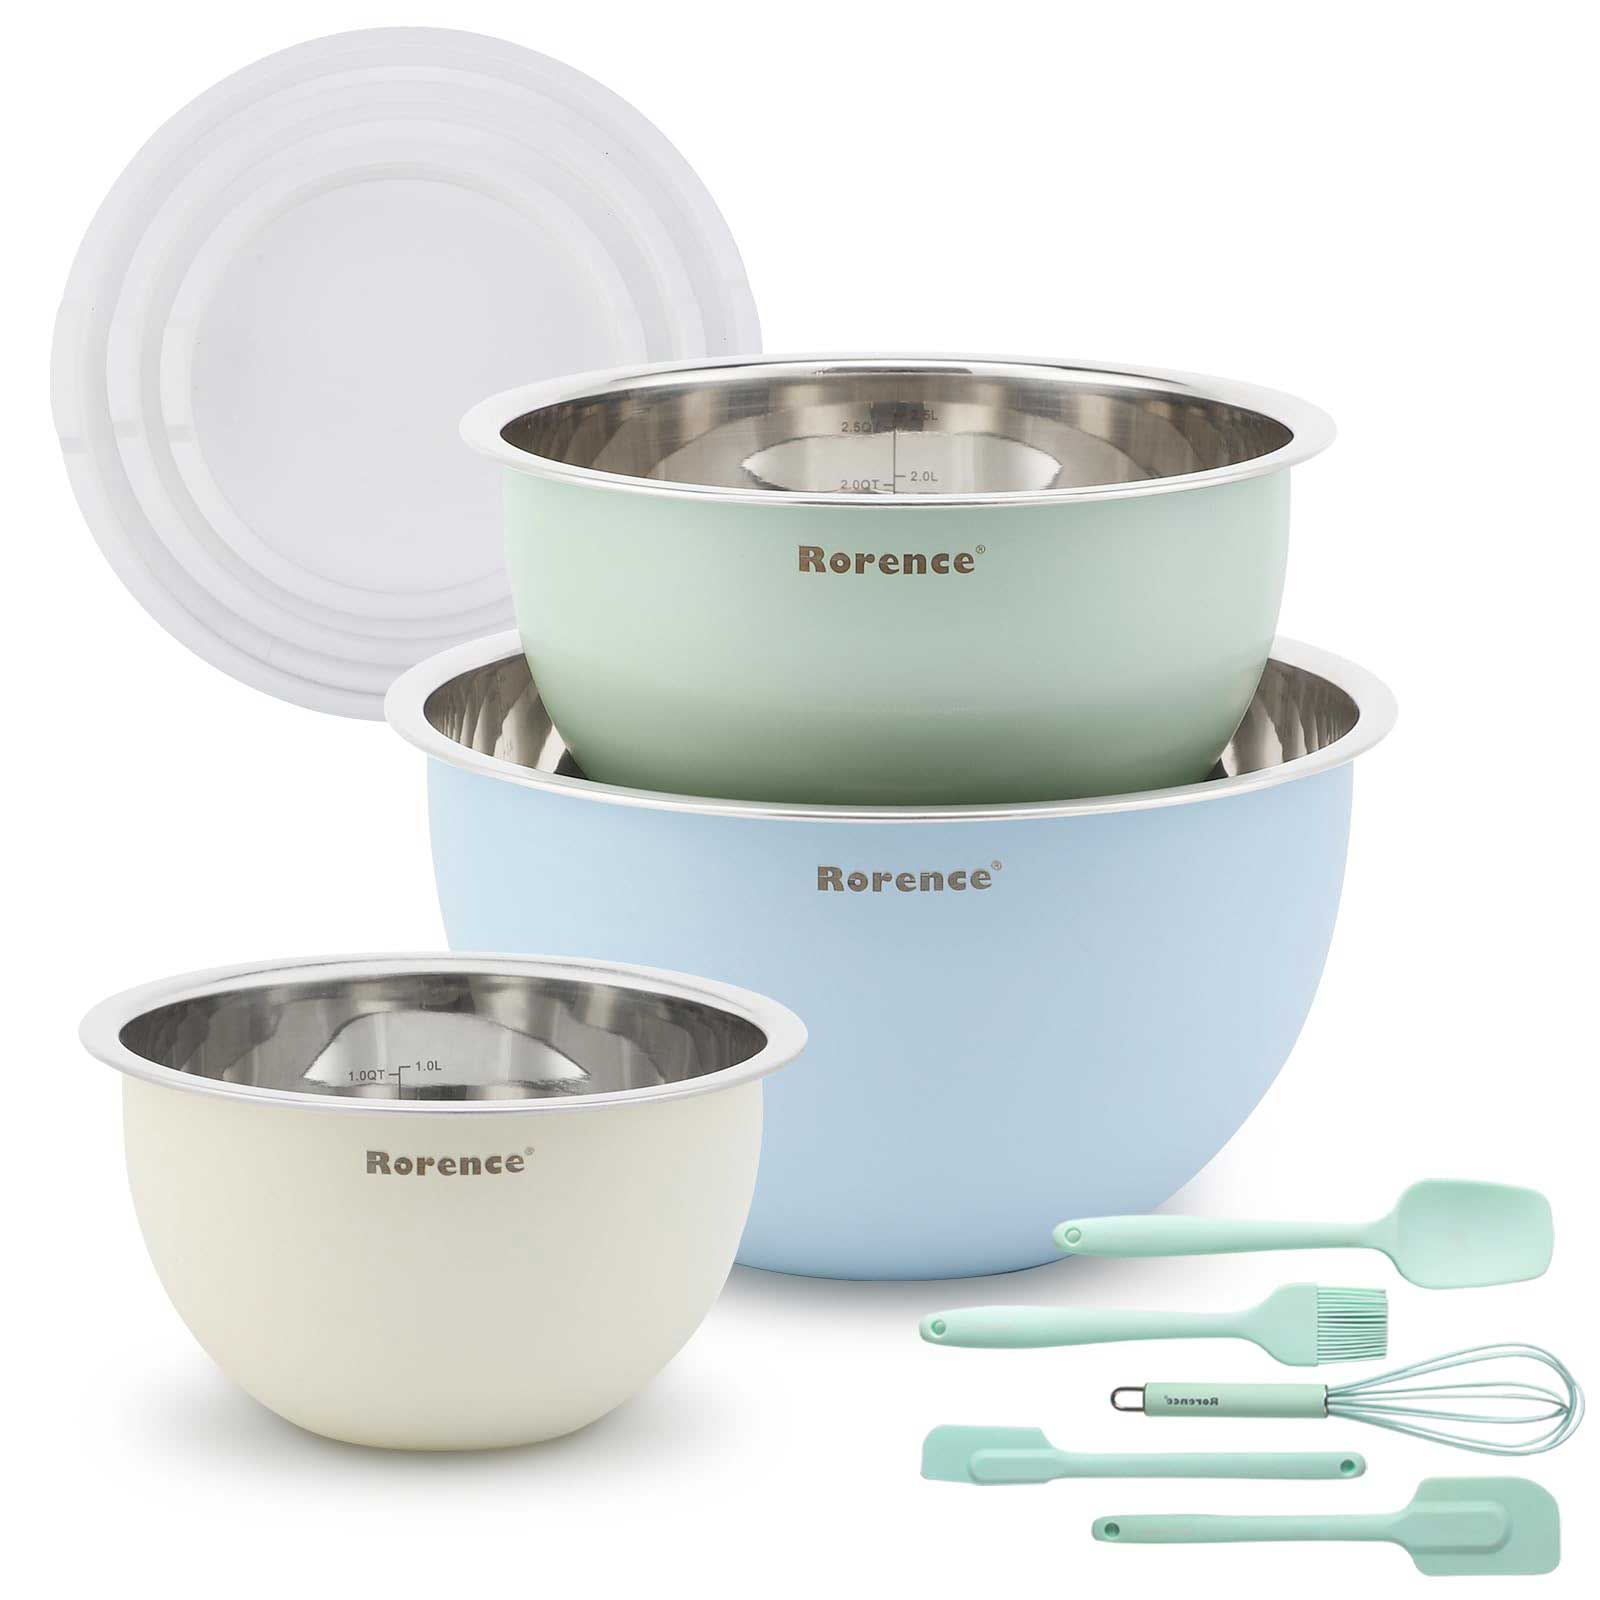 Rorence Stainless Steel Mixing Bowls: Colored Metal Mixing Bowl Set with Lids